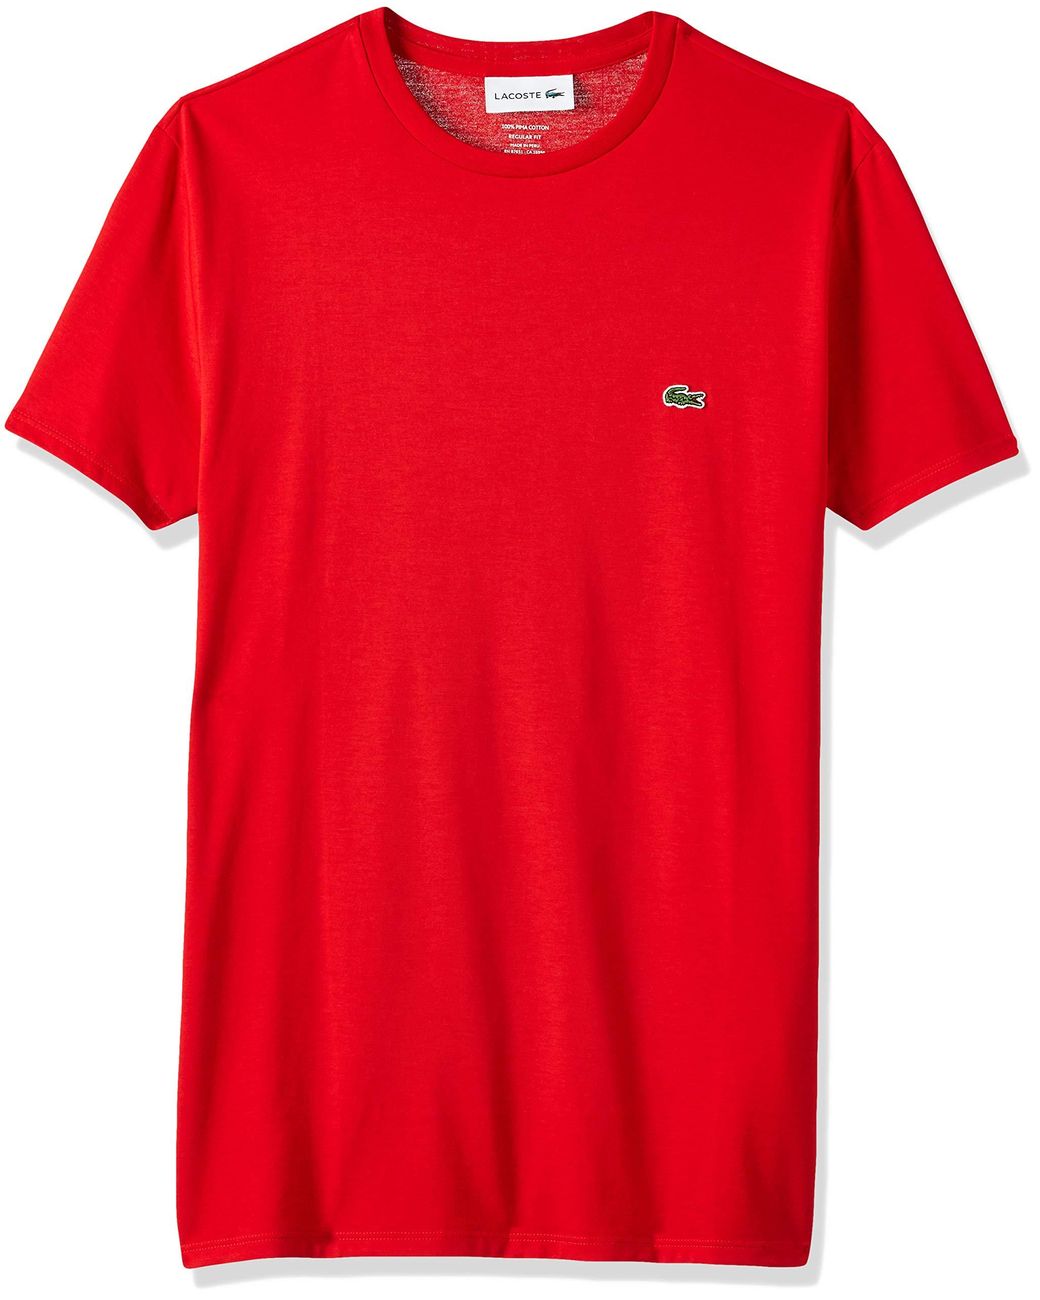 Lacoste Short Sleeve Crew Neck Pima Cotton Jersey T-shirt in Red Bright ...